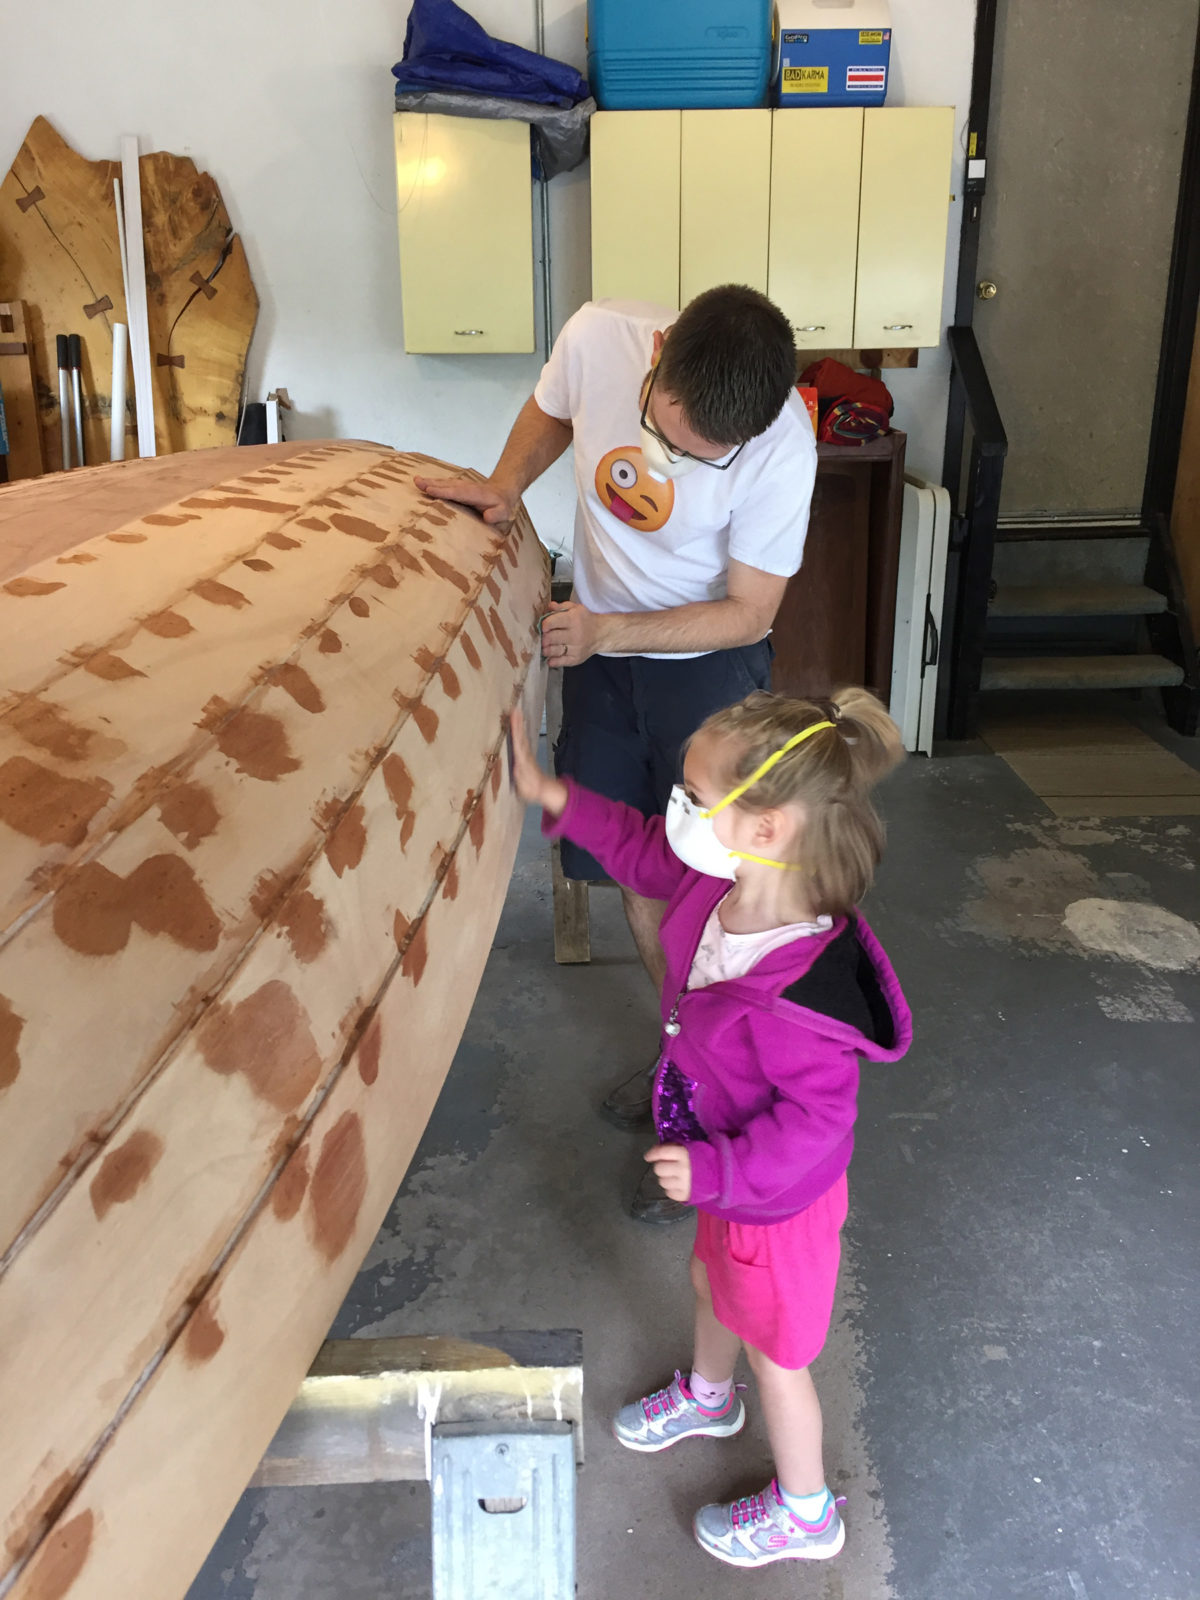 James' daughter Kyrie was three when construction began. By the time she had turned four, she had taken an interest in helping build the boat.